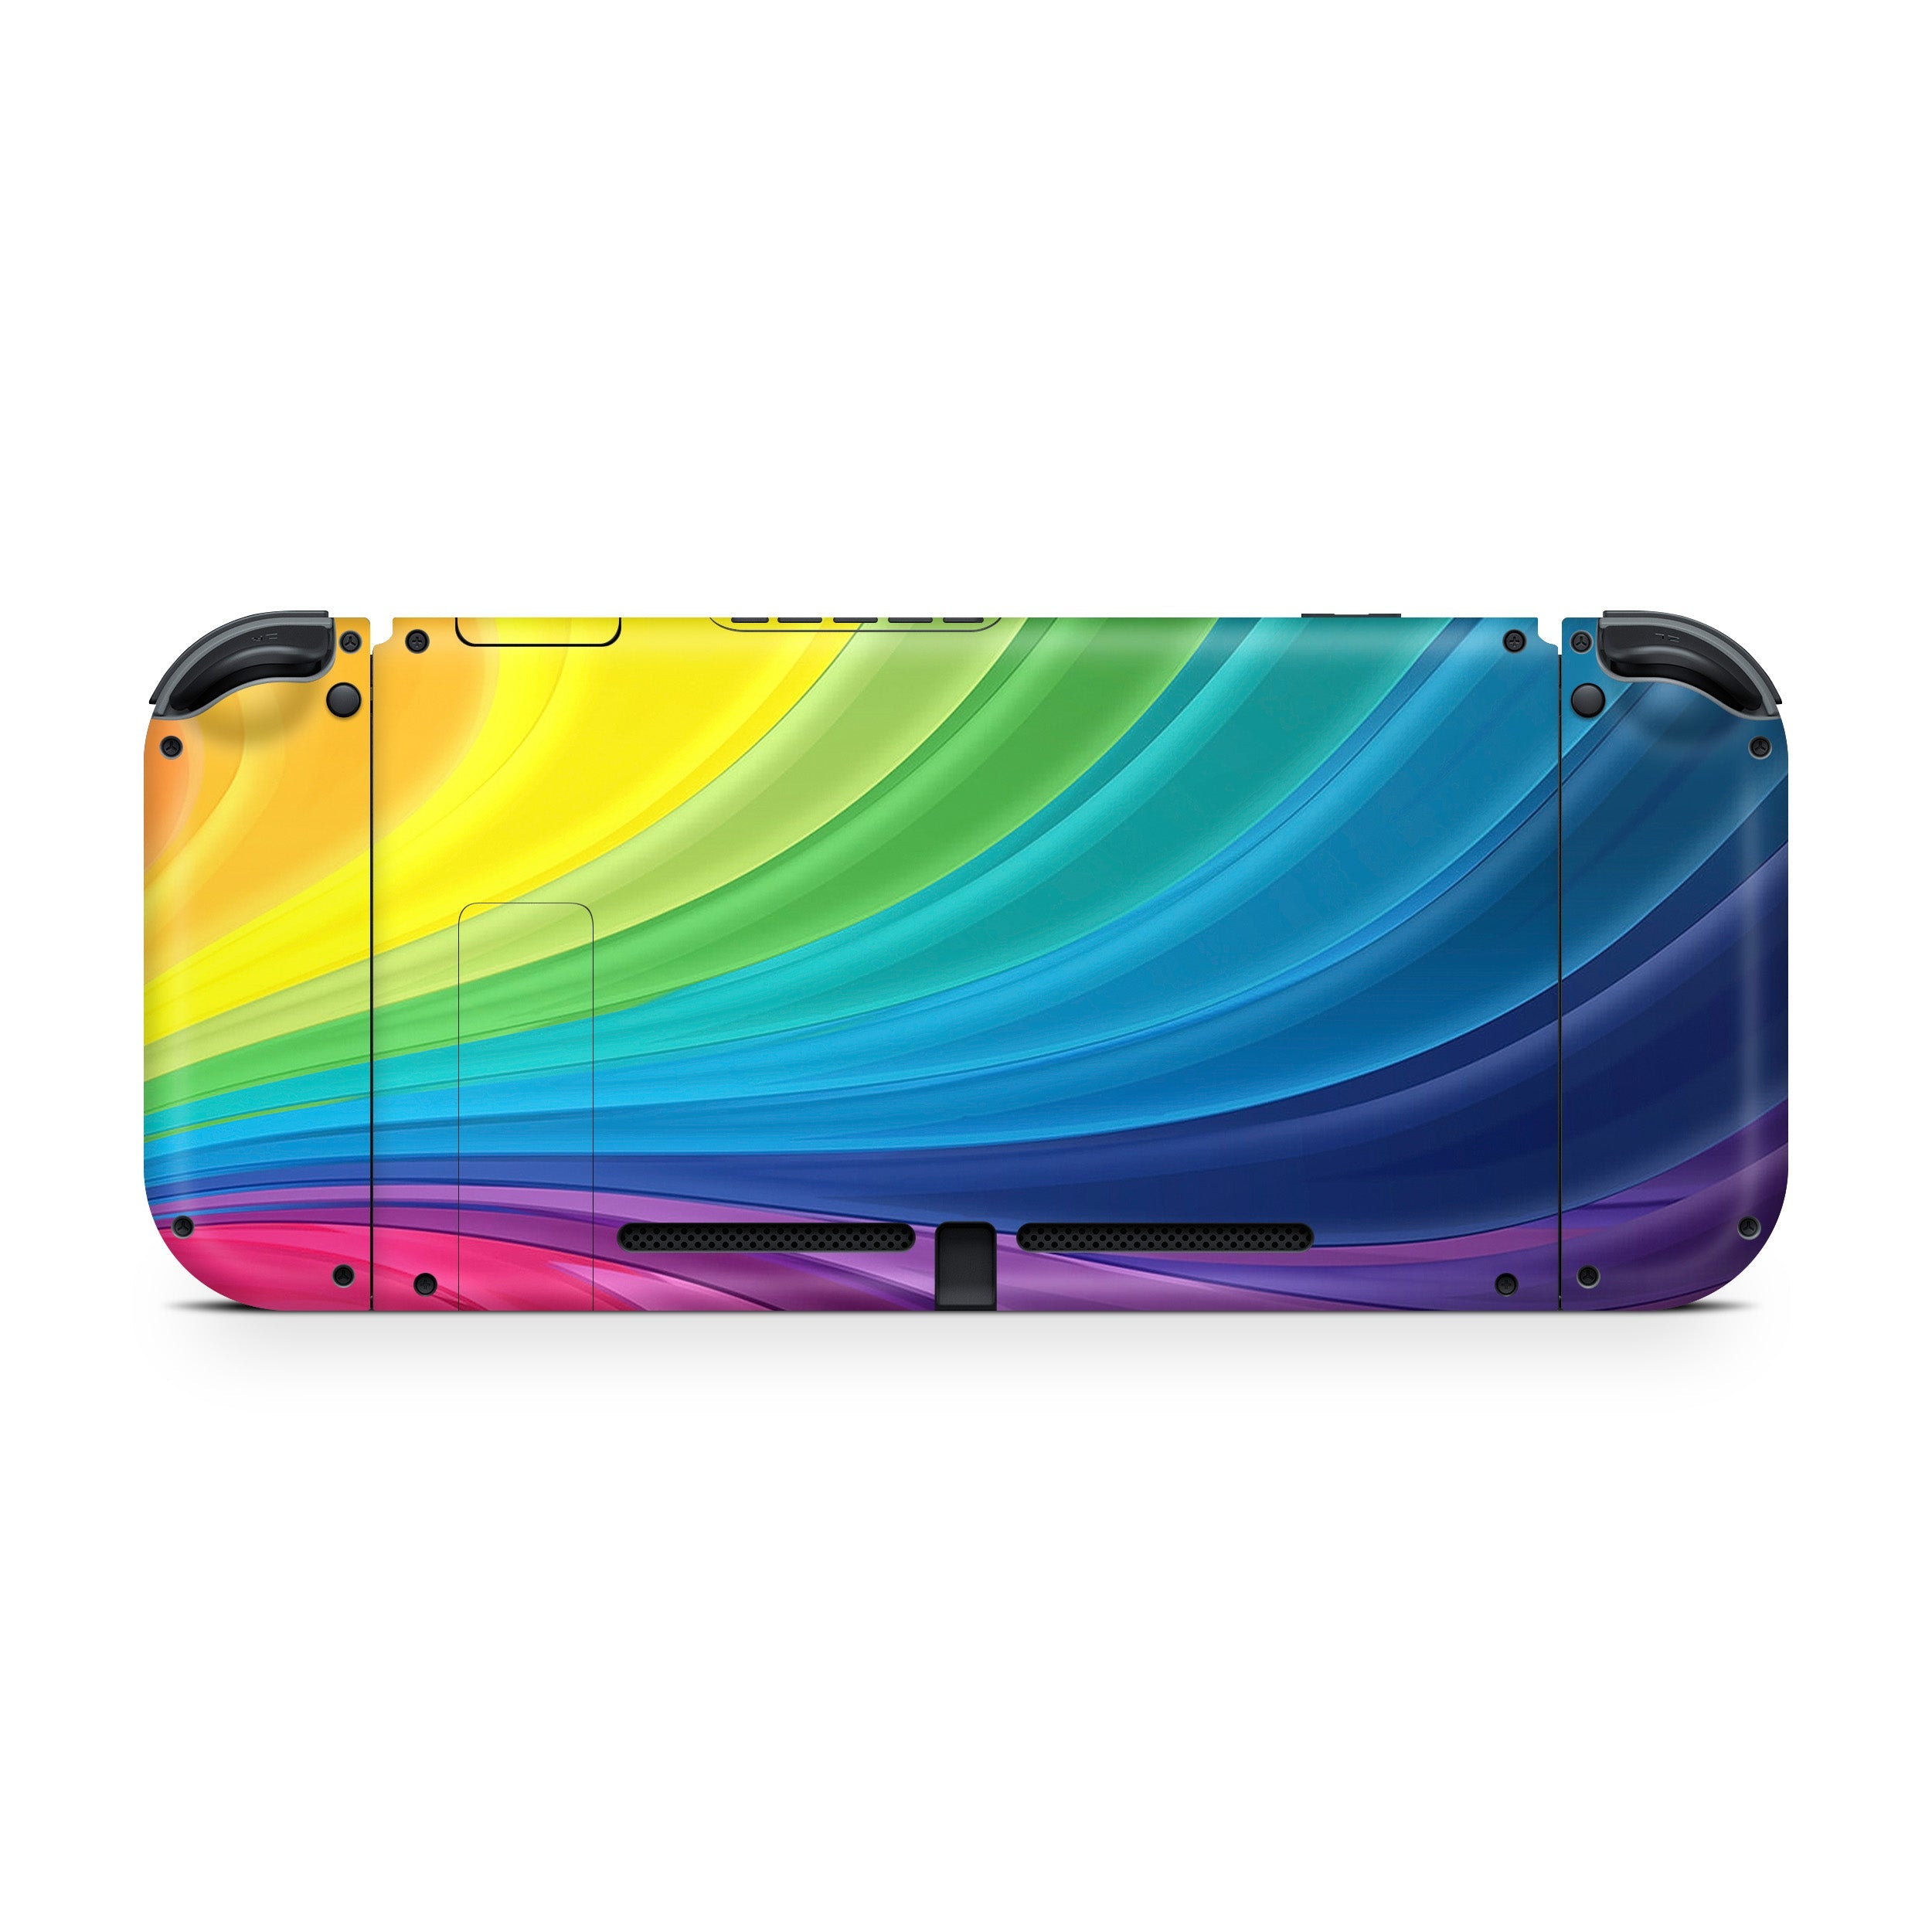 A video game skin featuring a Colorful Rainbow Swirl design for the Nintendo Switch.